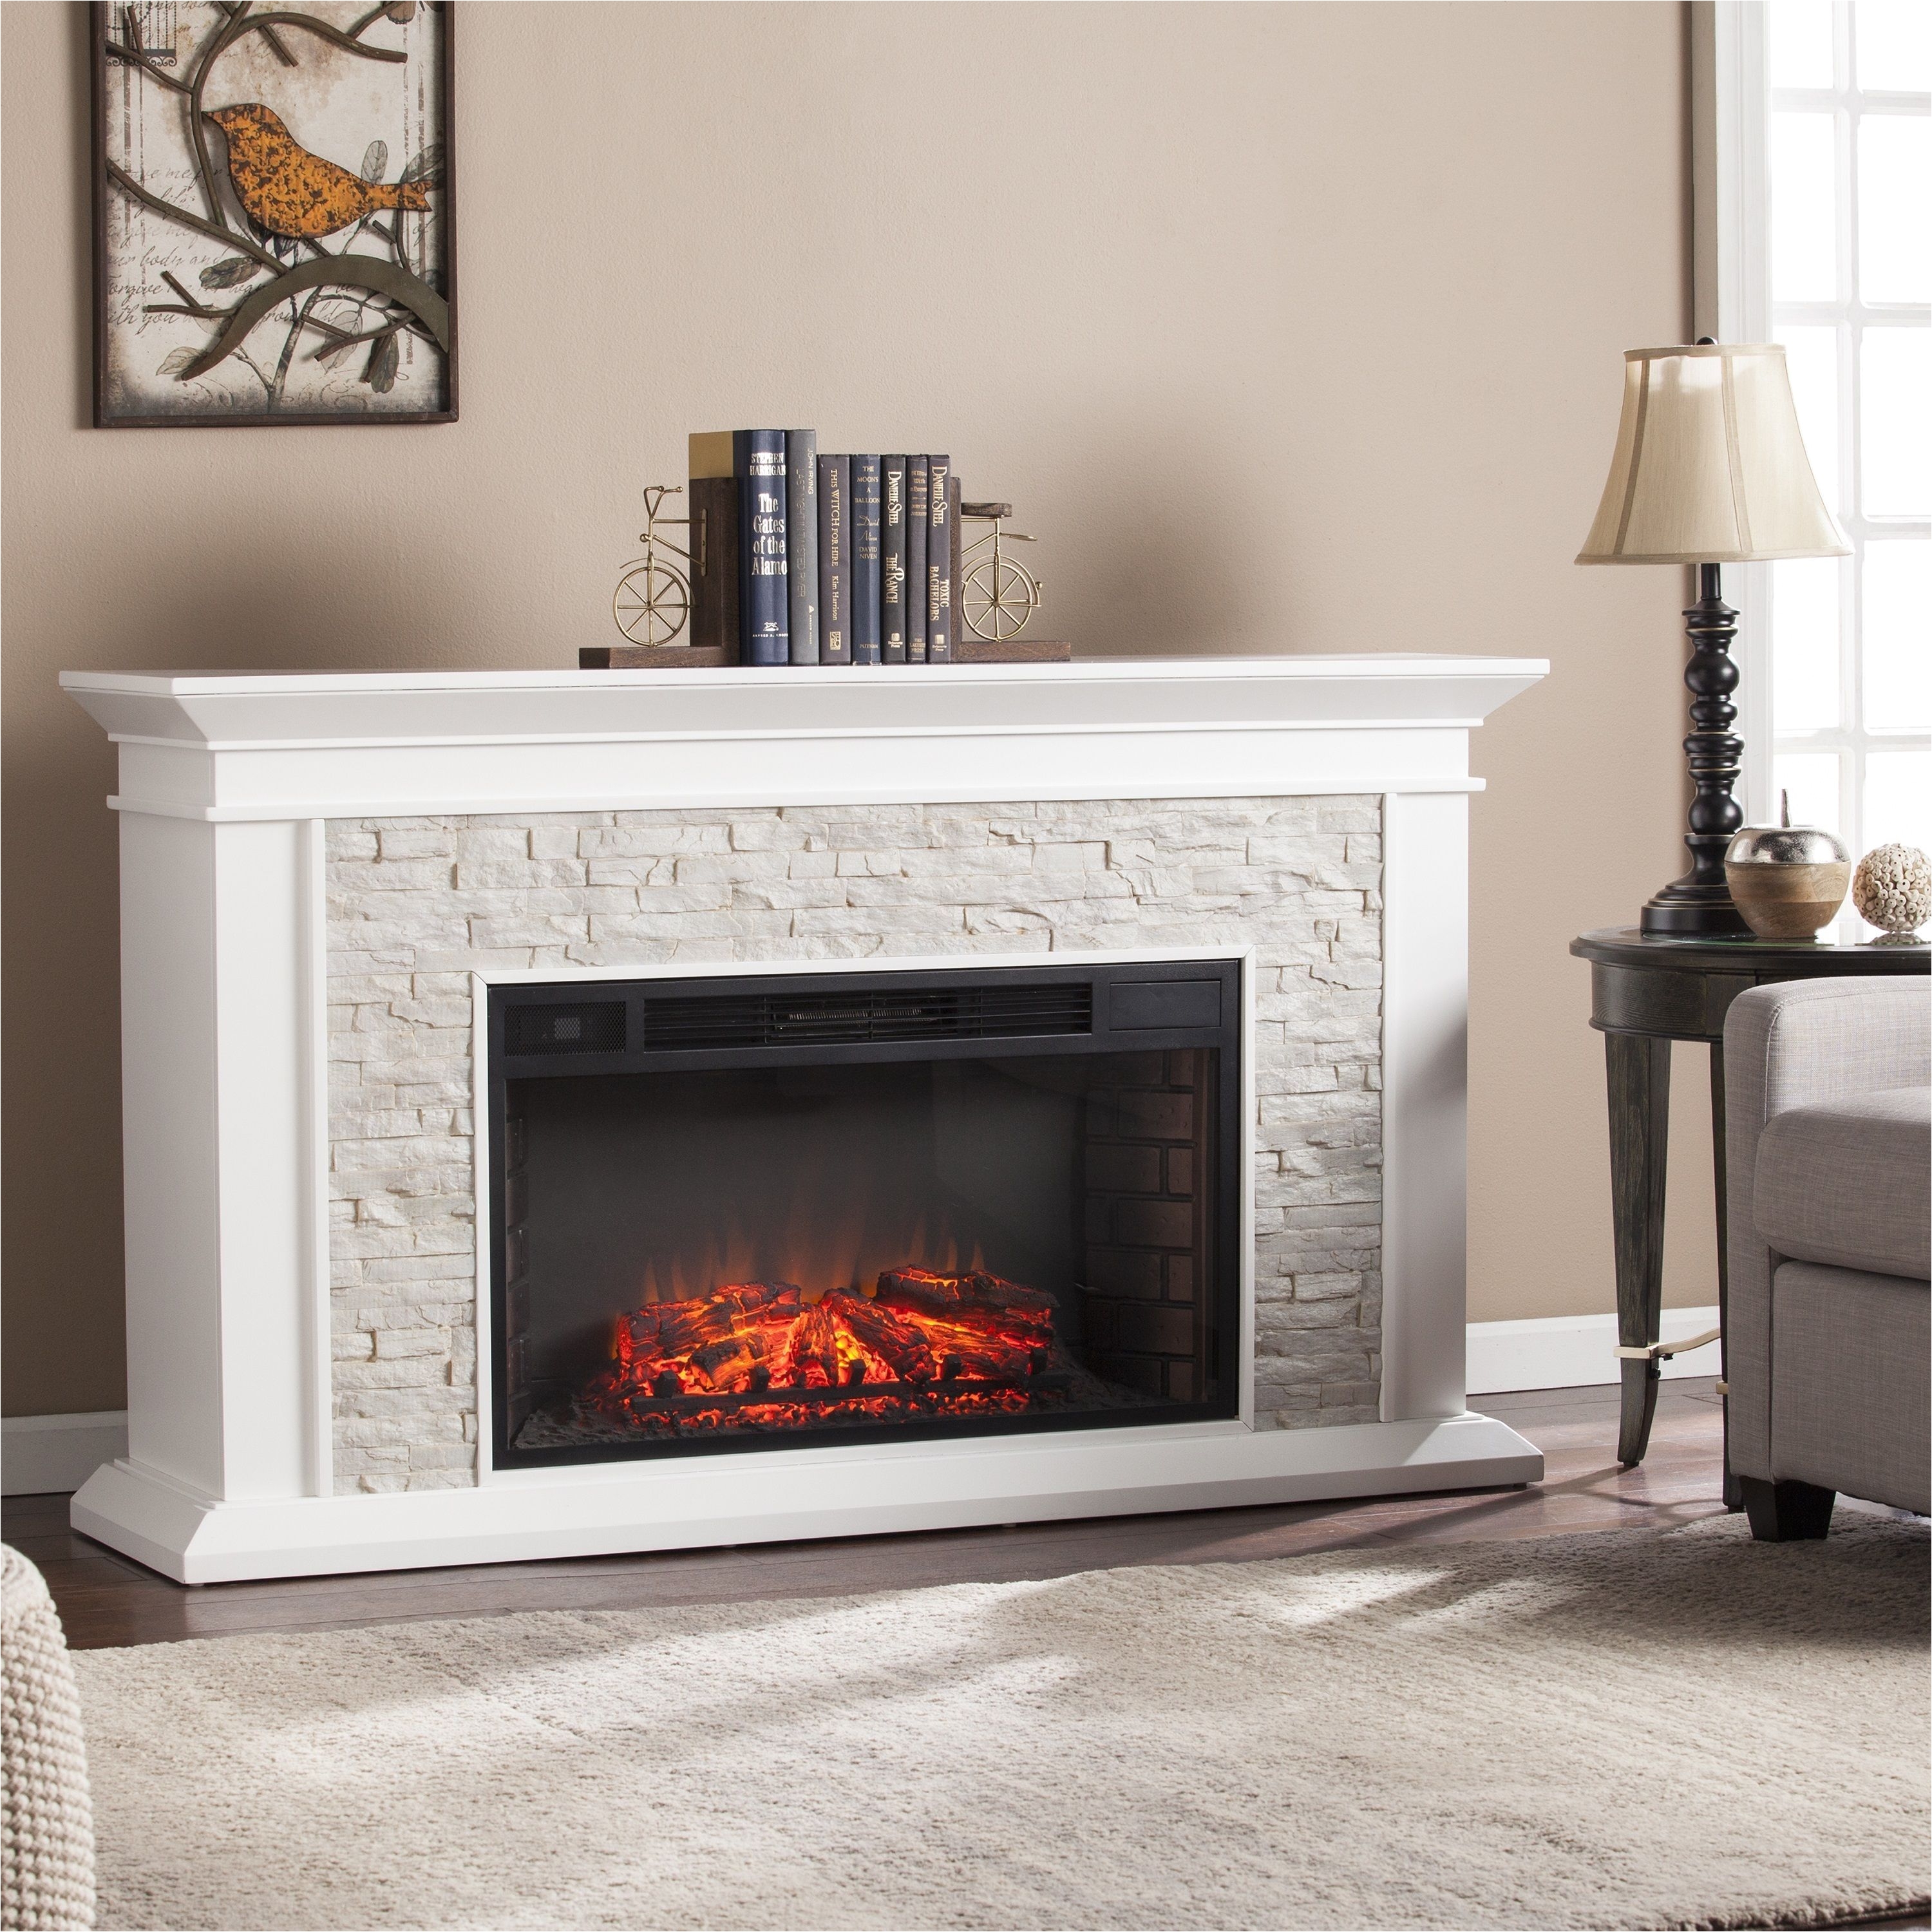 Big Lots Fireplace Screens Add A Romantic touch to Your Dcor Scene with This Rustic Inspired